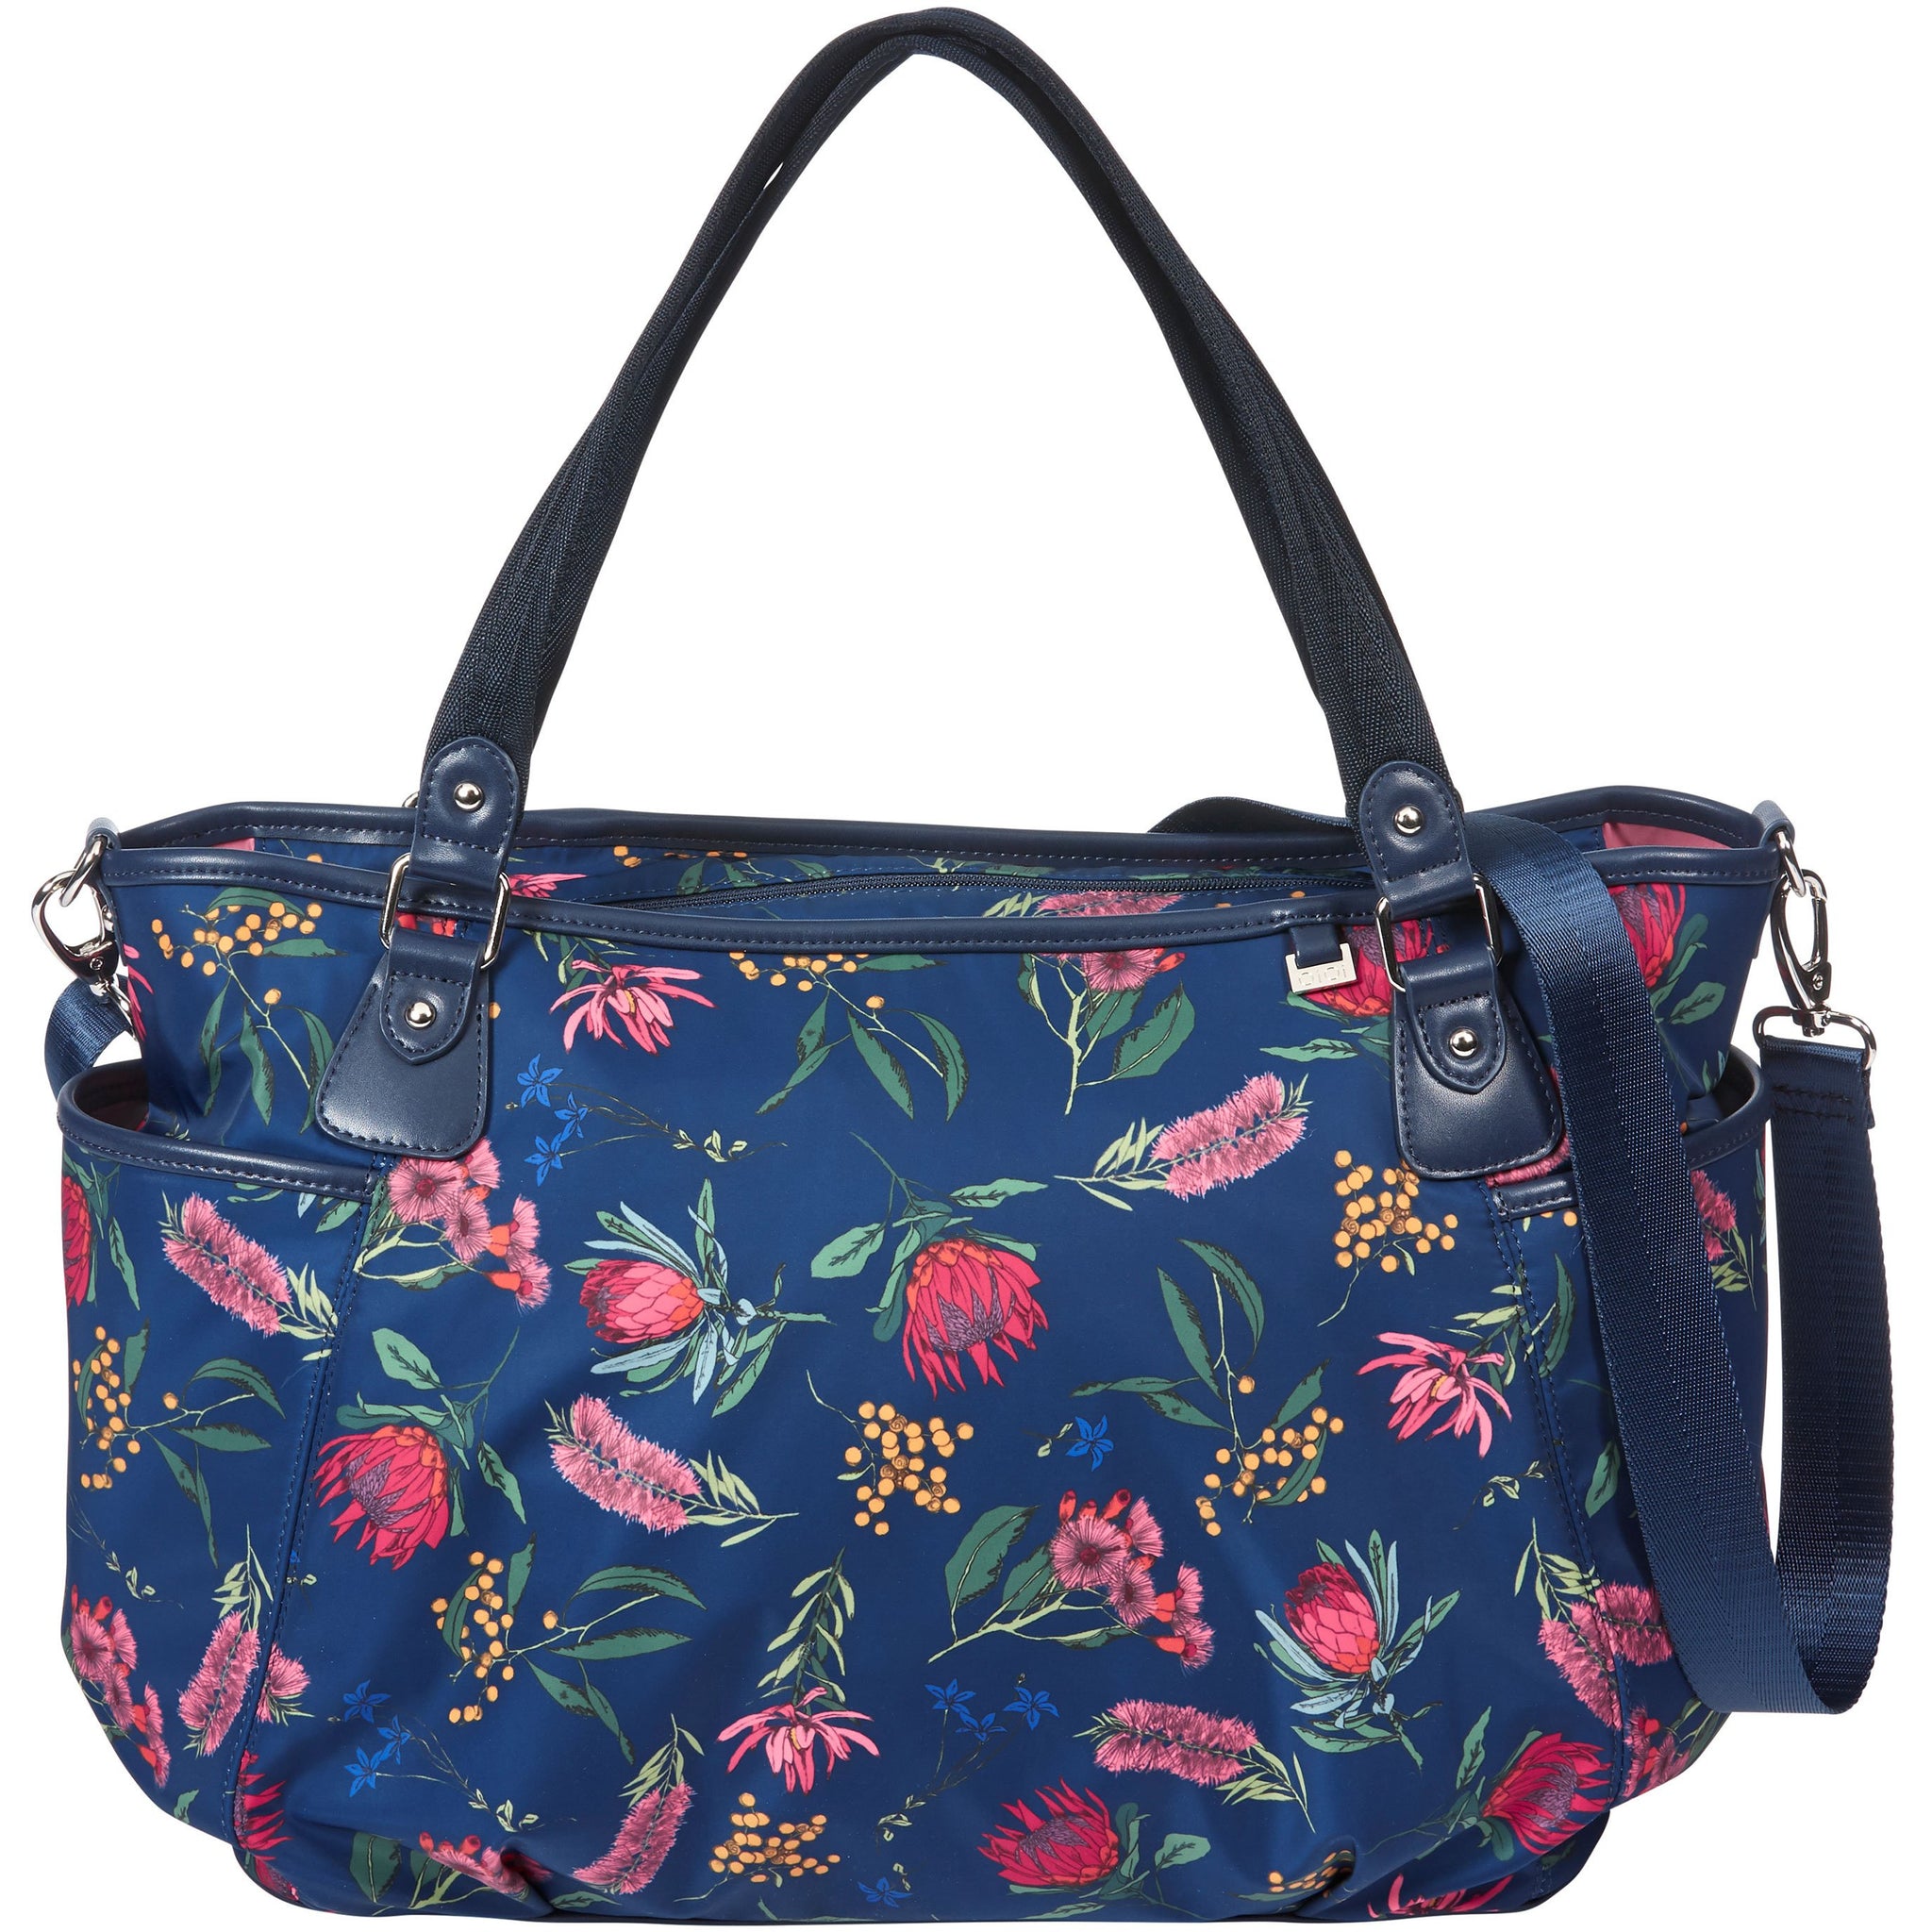 OiOi Tote Nappy Bag - Botanical Navy - Baby HQ